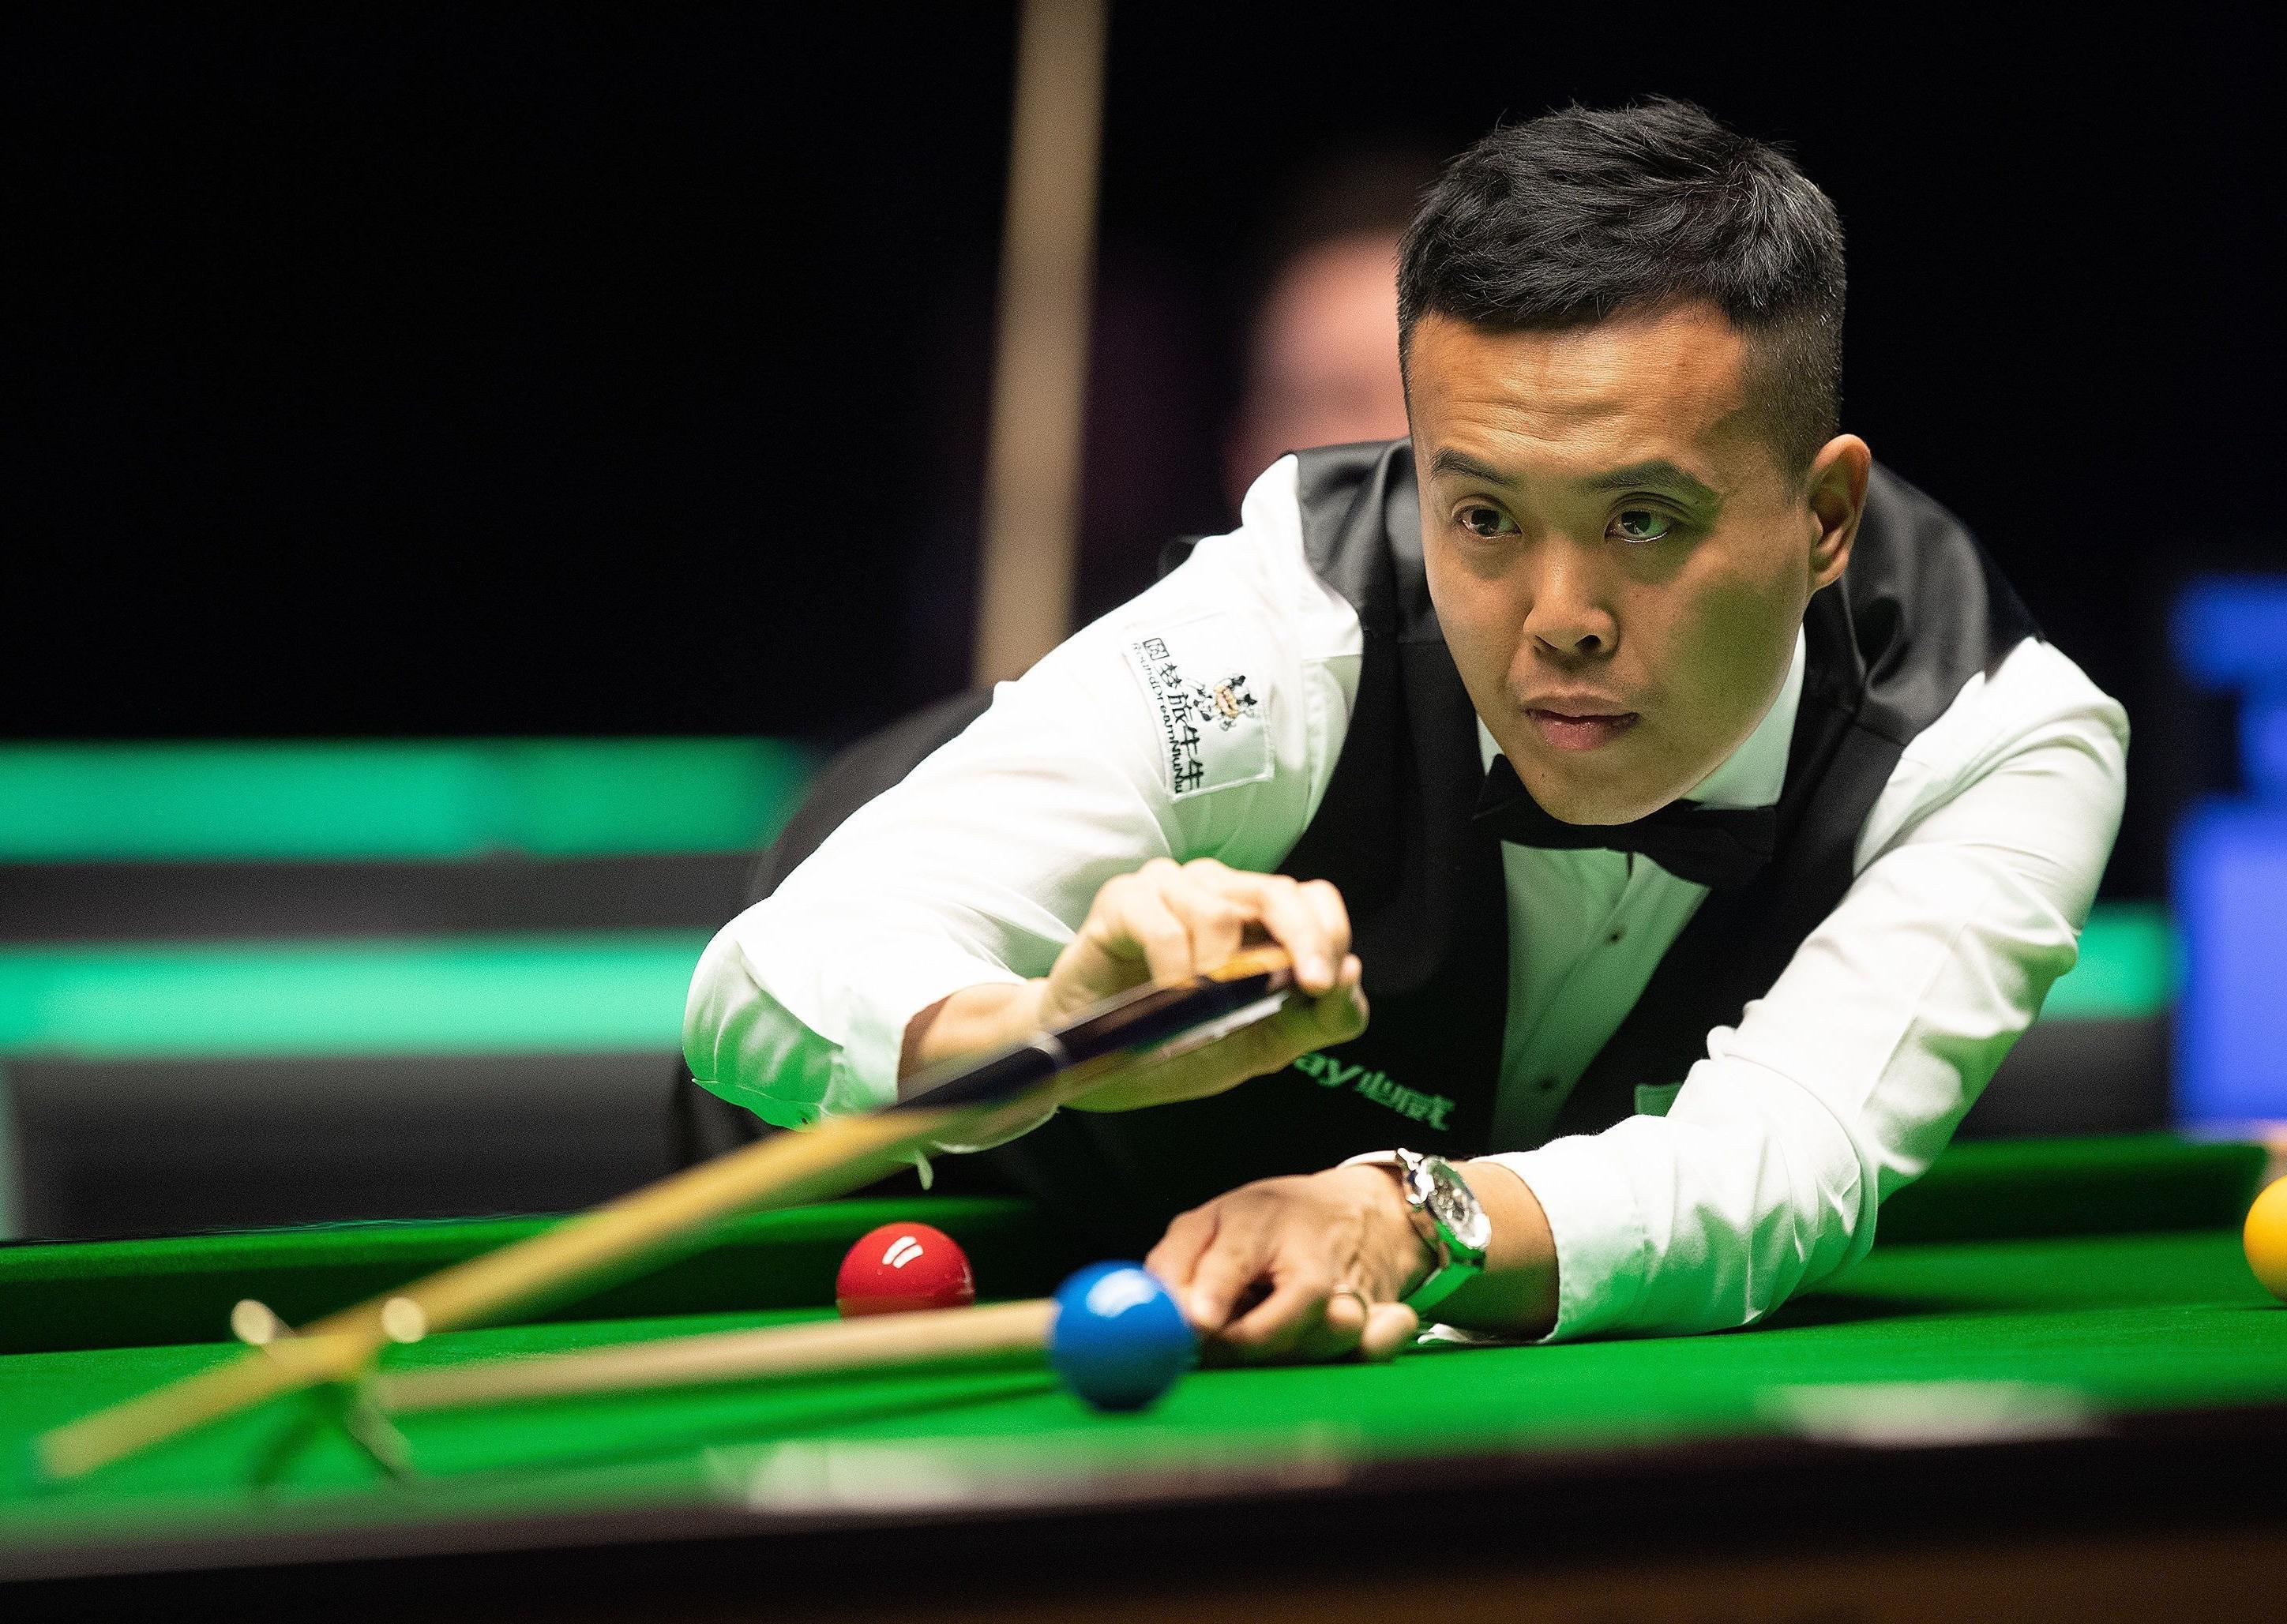 World Snooker Championship must go on despite pandemic forcing stars to